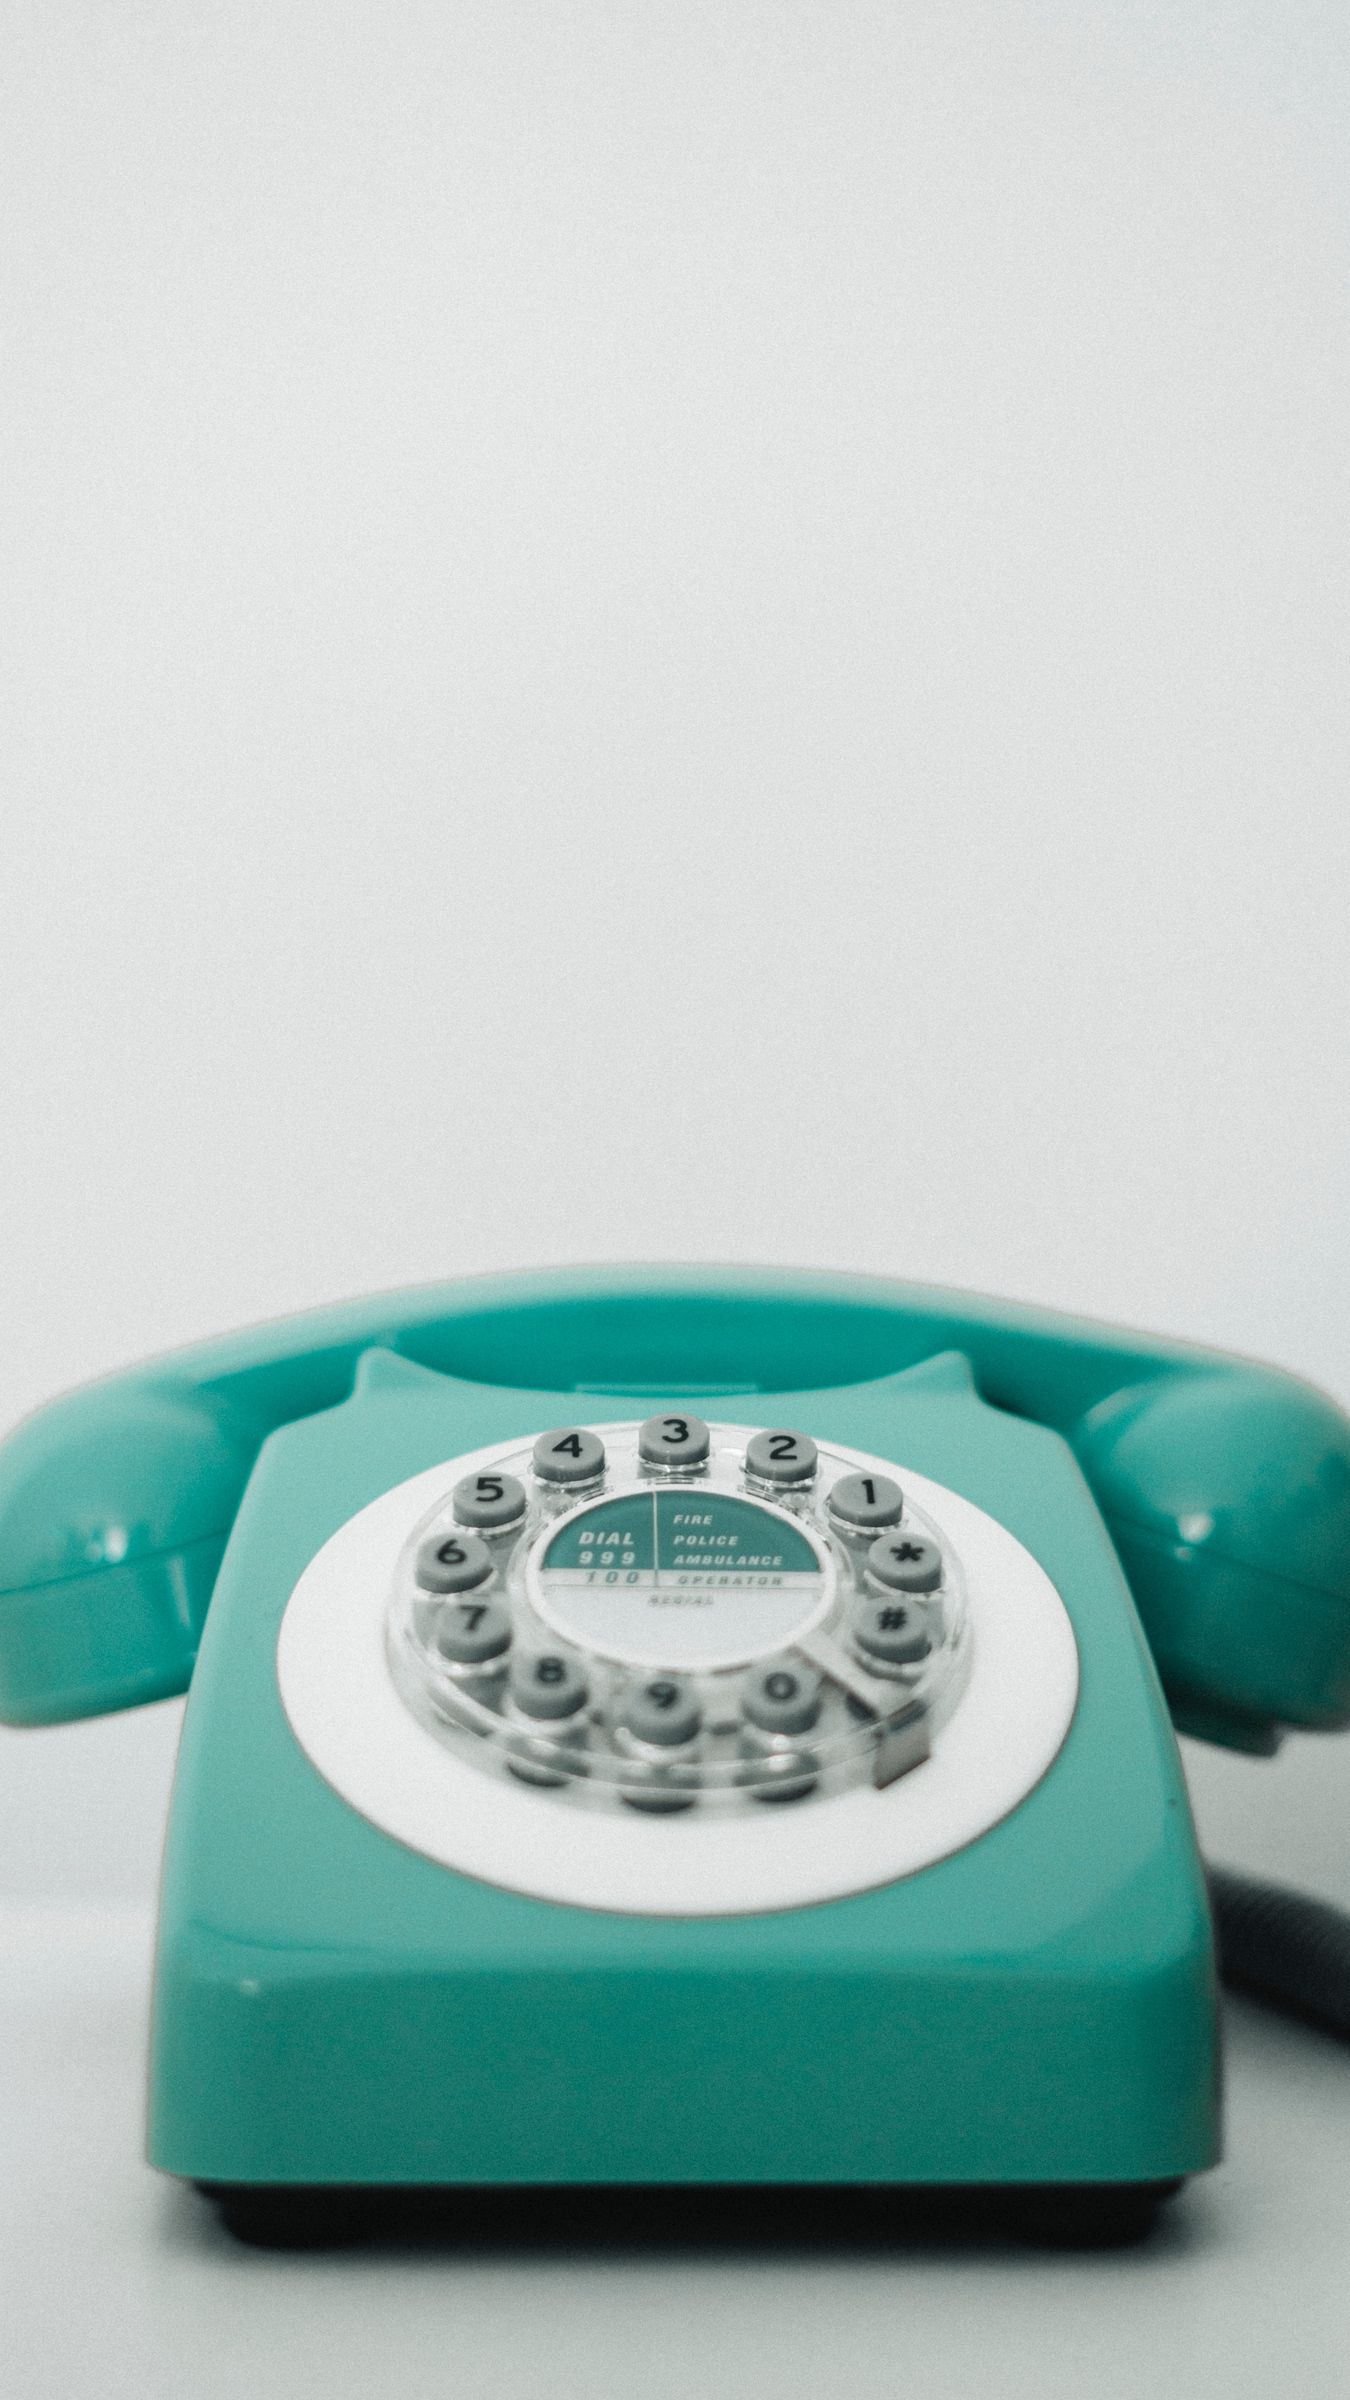 Download wallpaper 1350x2400 phone, retro, vintage, old, turquoise